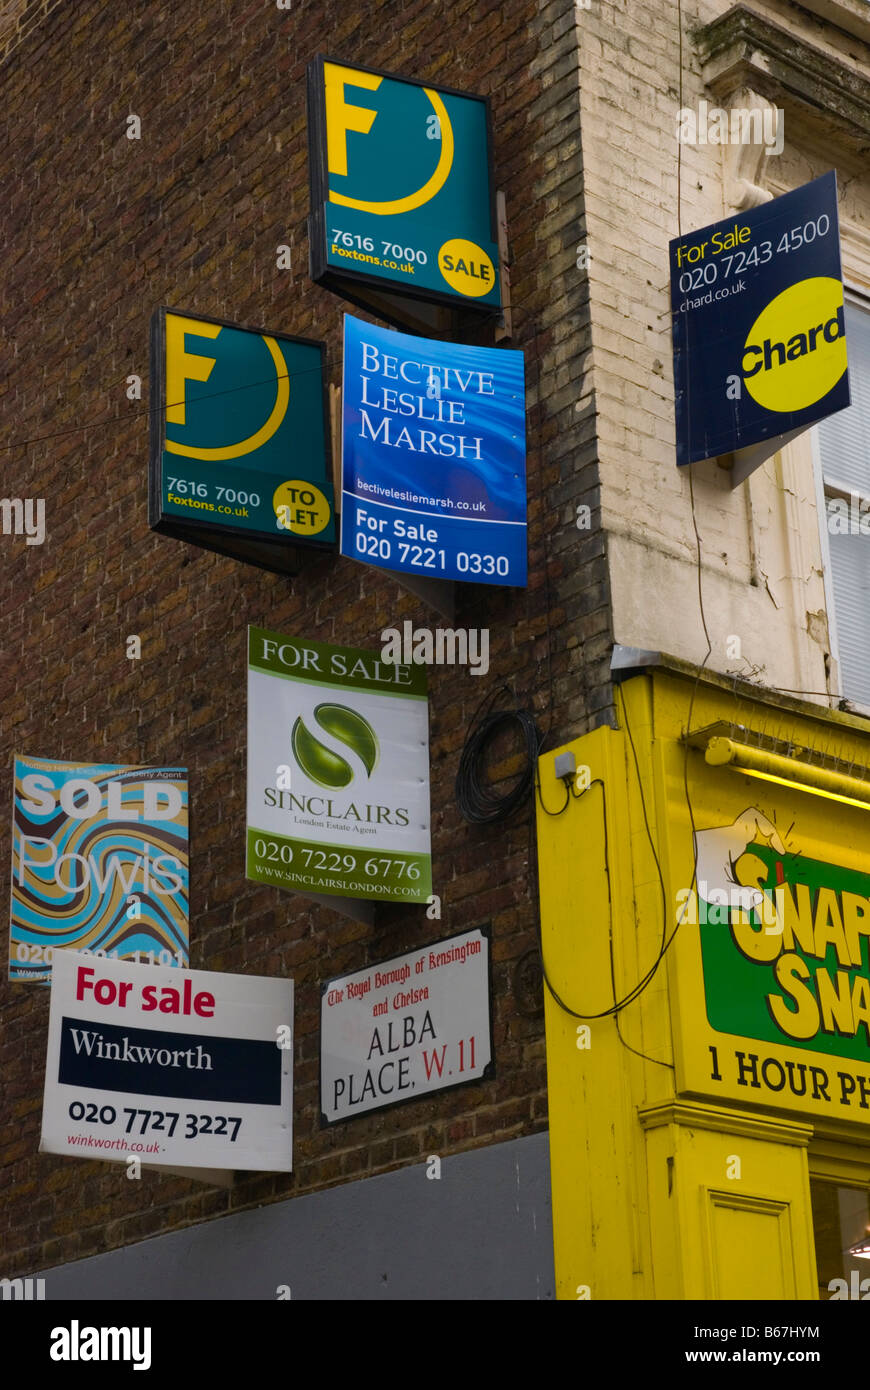 For sales sings for property at the corner of Portobello Road and Alba place in West London England UK Stock Photo